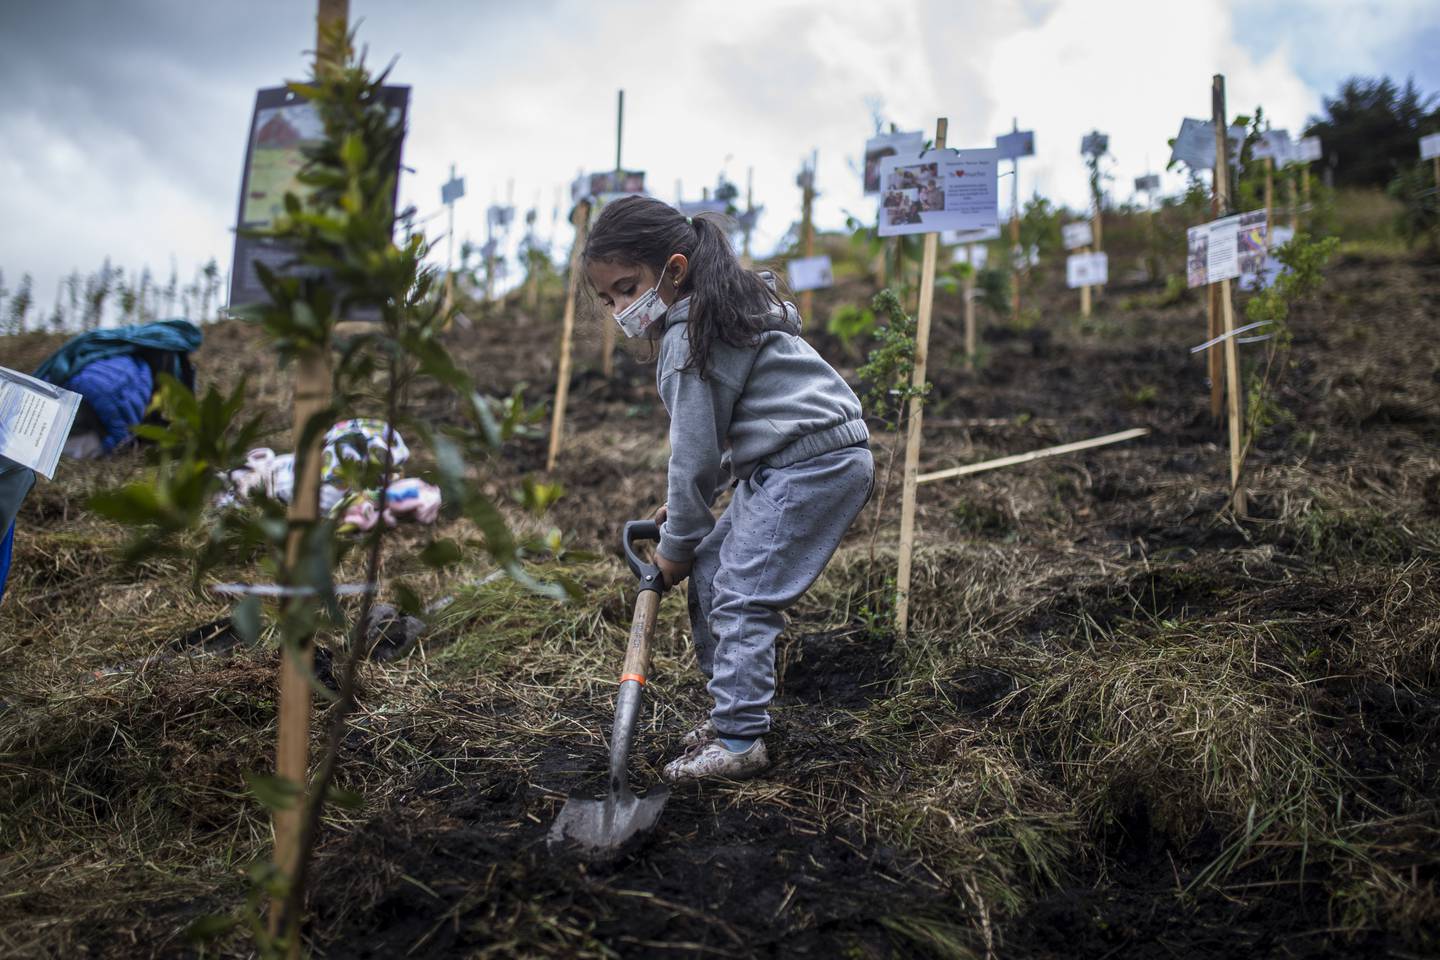 FILE - A child shovels dirt over a tree seedling planted with the remains of a family member who died from complications related to COVID-19, on a hill in the El Pajonal de Cogua Natural Reserve, north of Bogota, Colombia, June 24, 2021. As Colombia suffers a critical moment of the pandemic, some families are bringing the cremated remains of their loved ones to the reserve where trees are planted with the ashes in their honor. (AP Photo/Ivan Valencia, File)